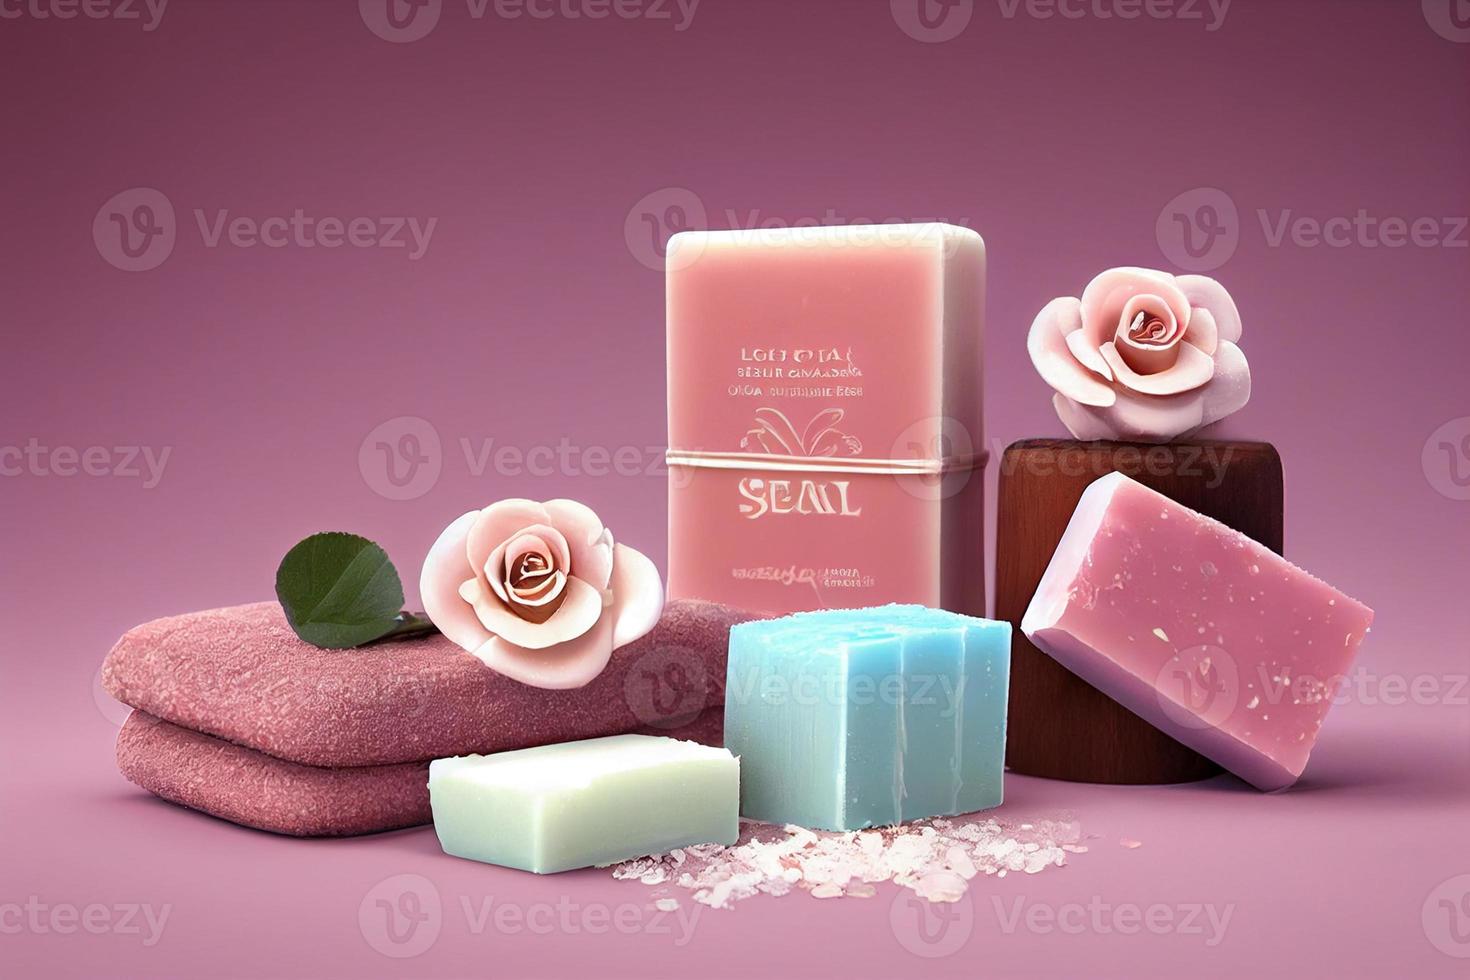 Rose beauty treatment items for spa procedures essential oils, soap and sea salt. photo